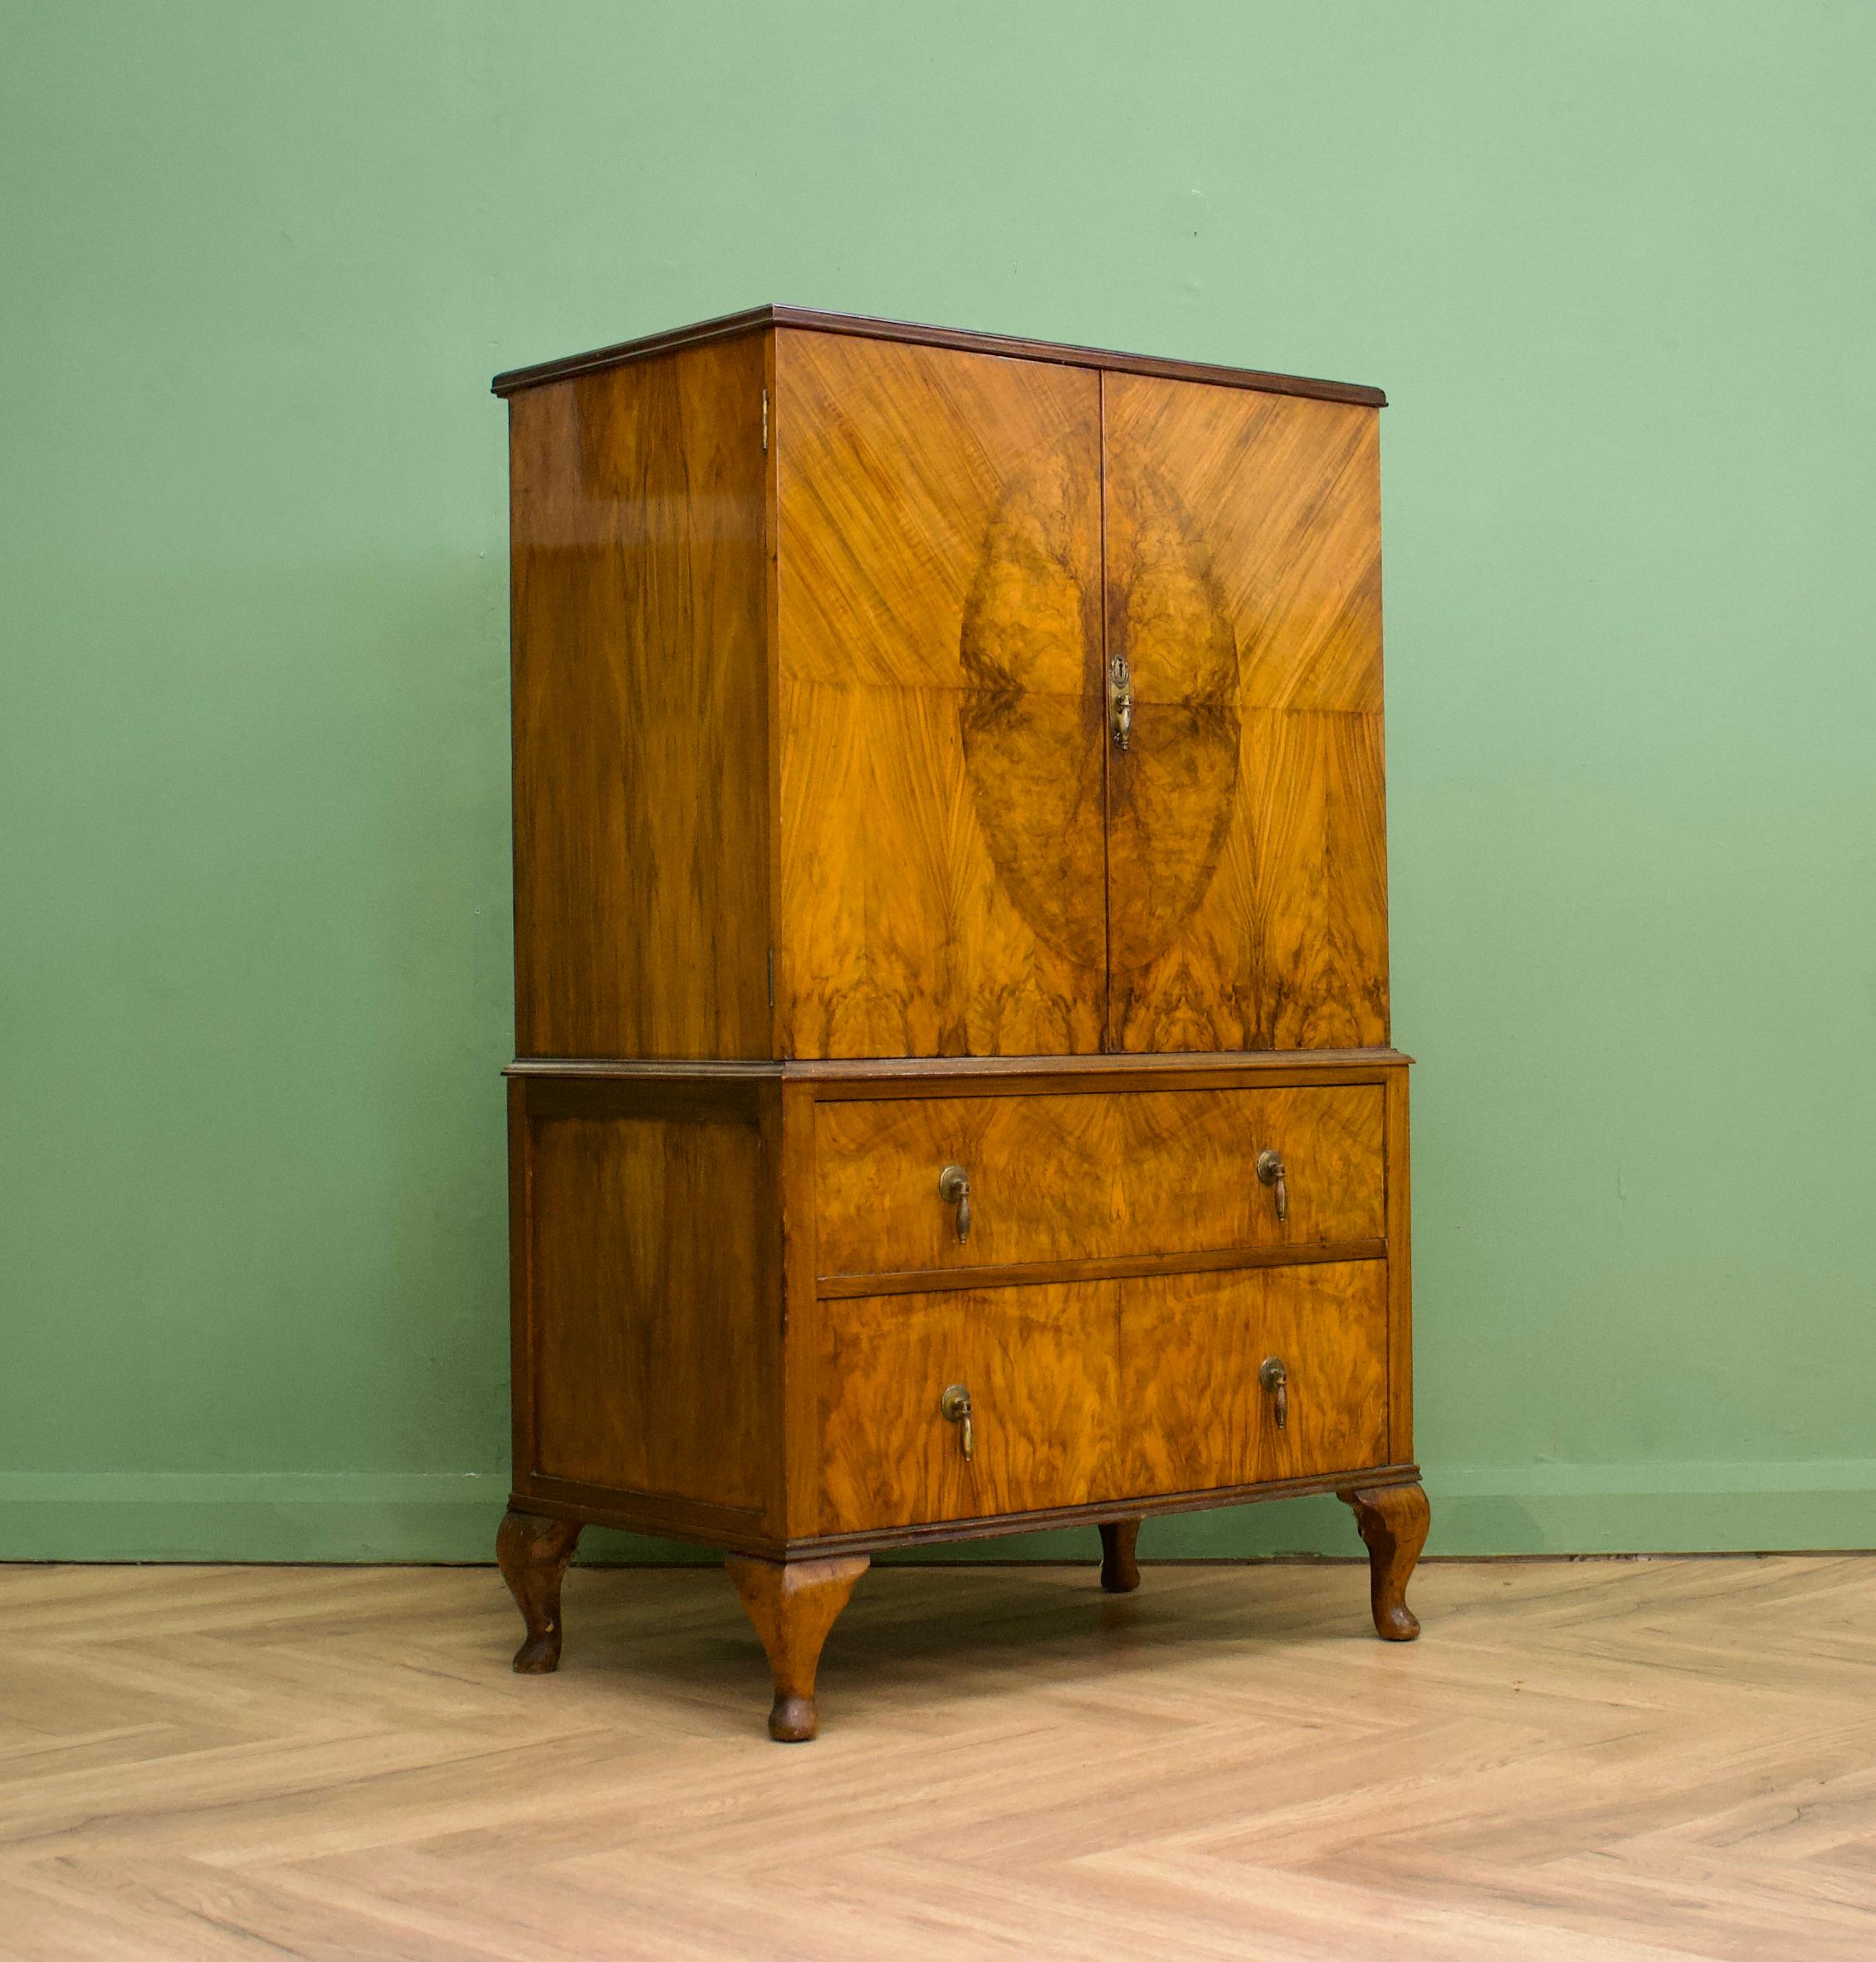 An impressive quality, 1930's style burr walnut linen cabinet - perfect for a maximalist interior - circa 1950s-1960s
The walnut veneers have been beautifully quarter matched on the doors and inlaid
 
The interior of the top cupboard is fitted out